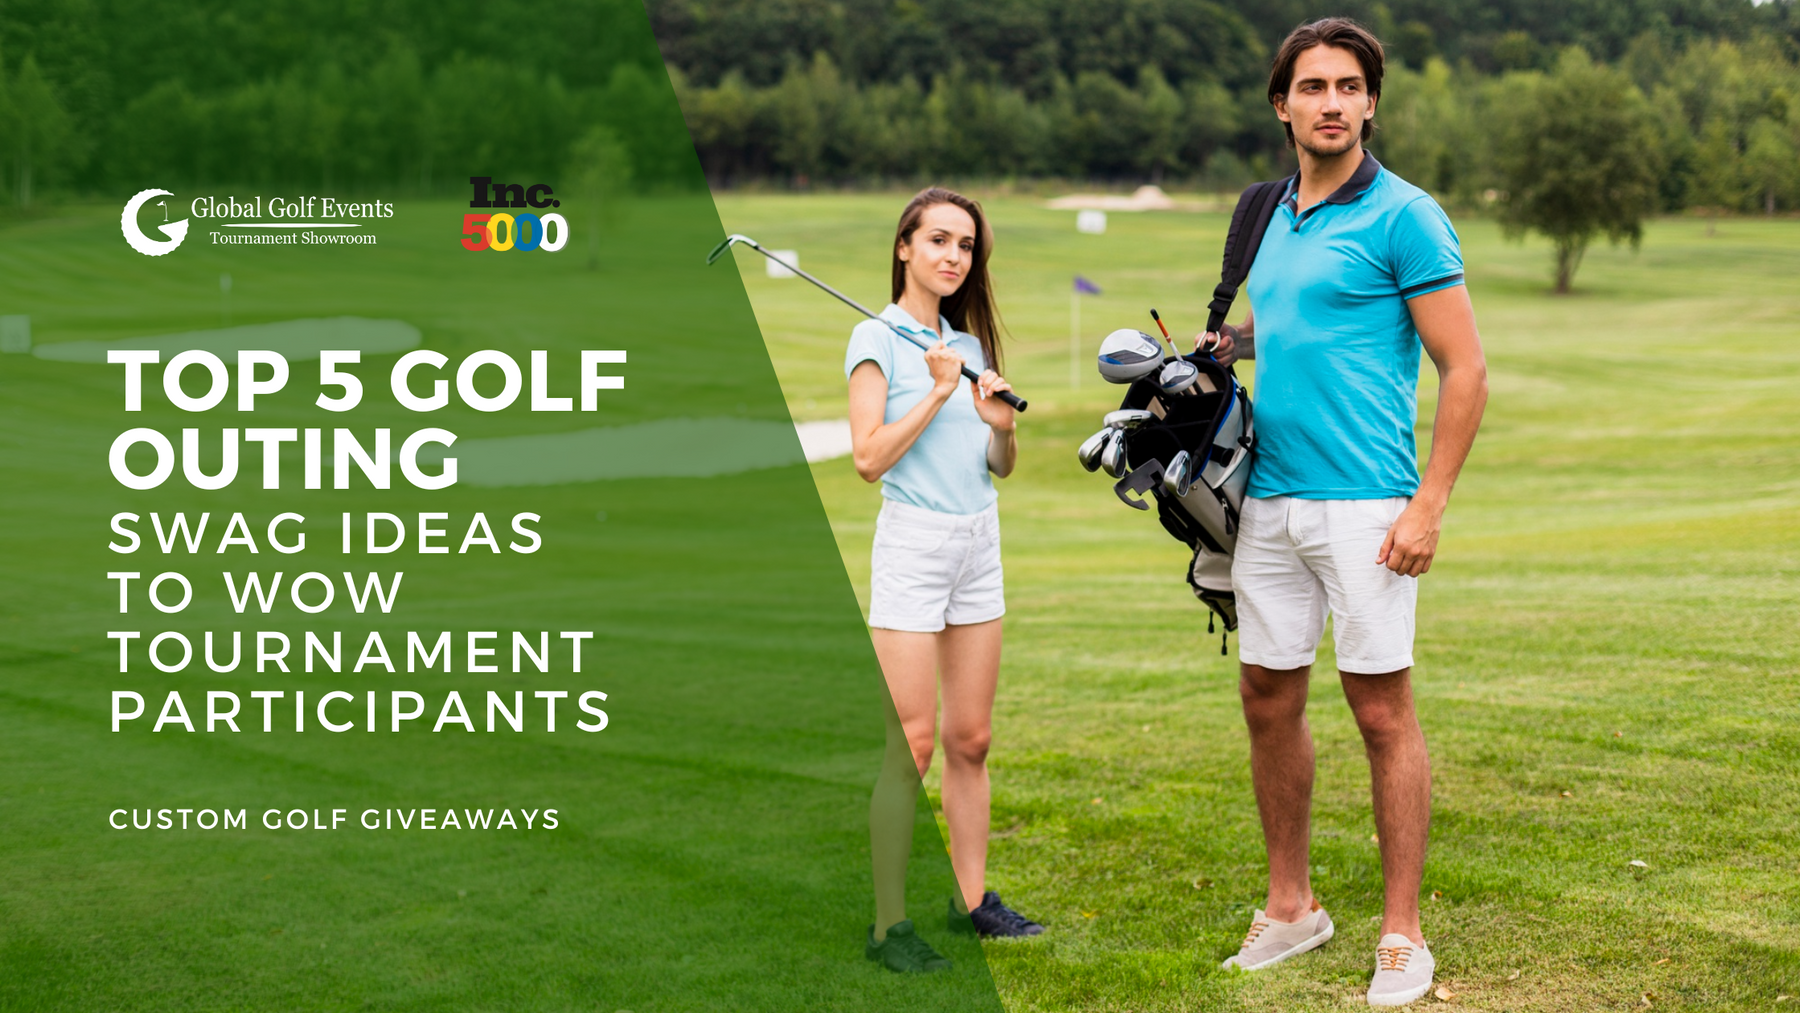 Top 5 Golf Outing Swag Ideas to Wow Tournament Participants